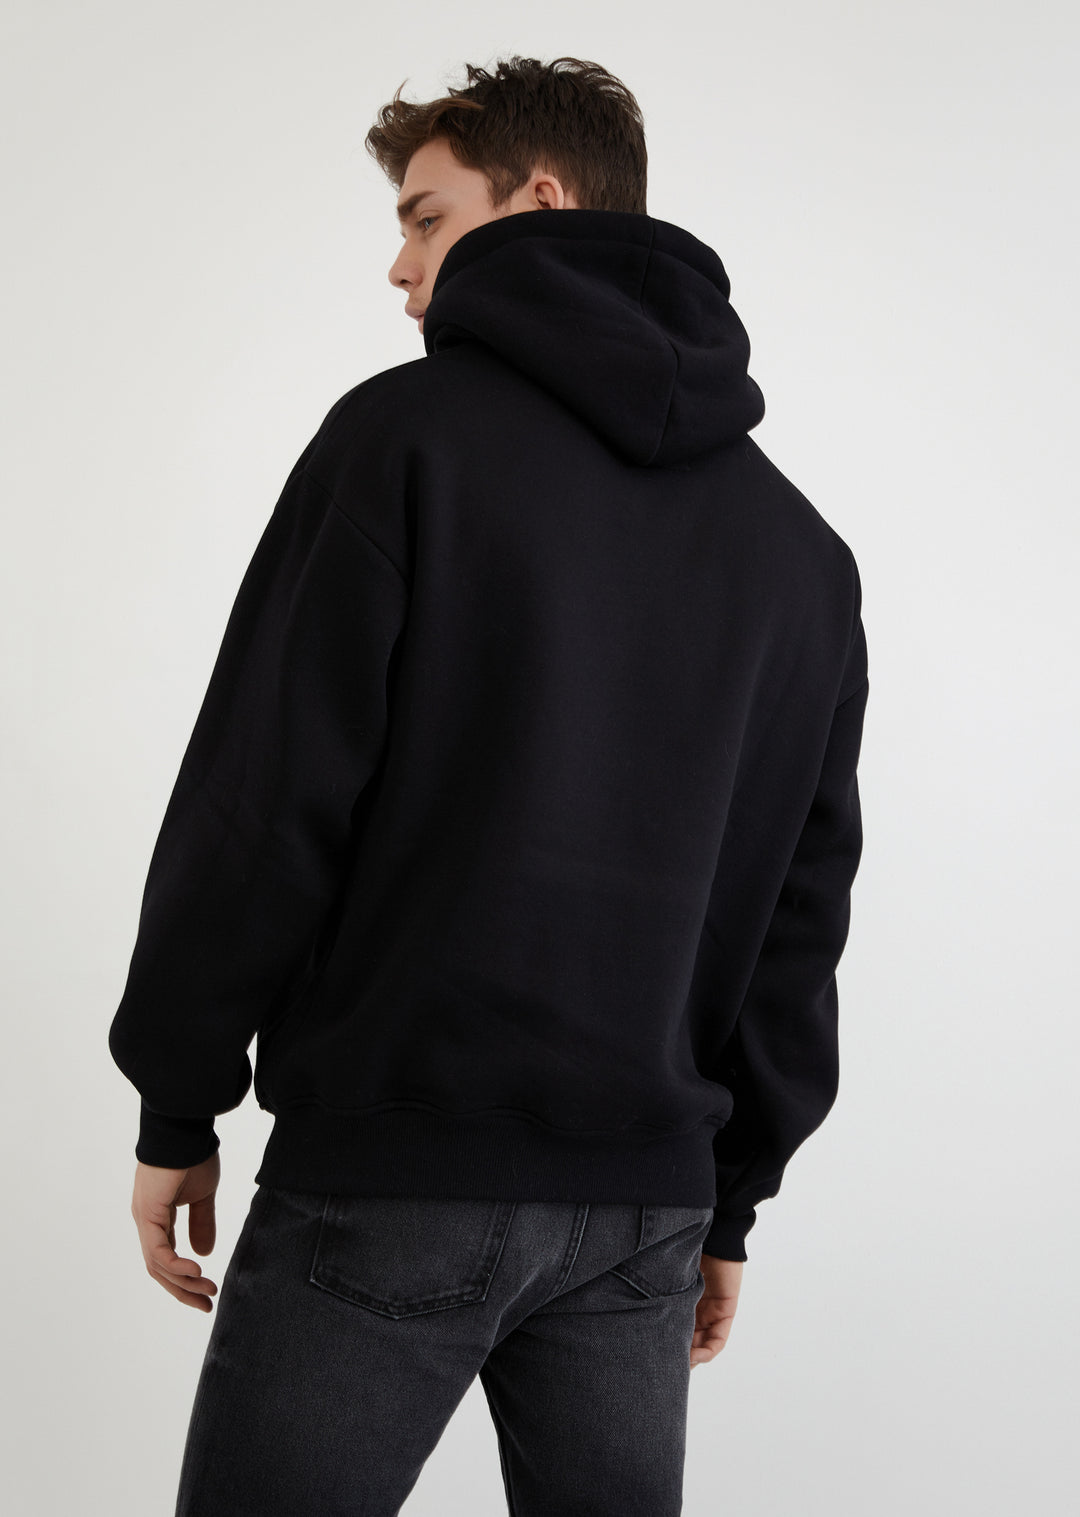 Turbulence / Oversized Pullover Hoodie